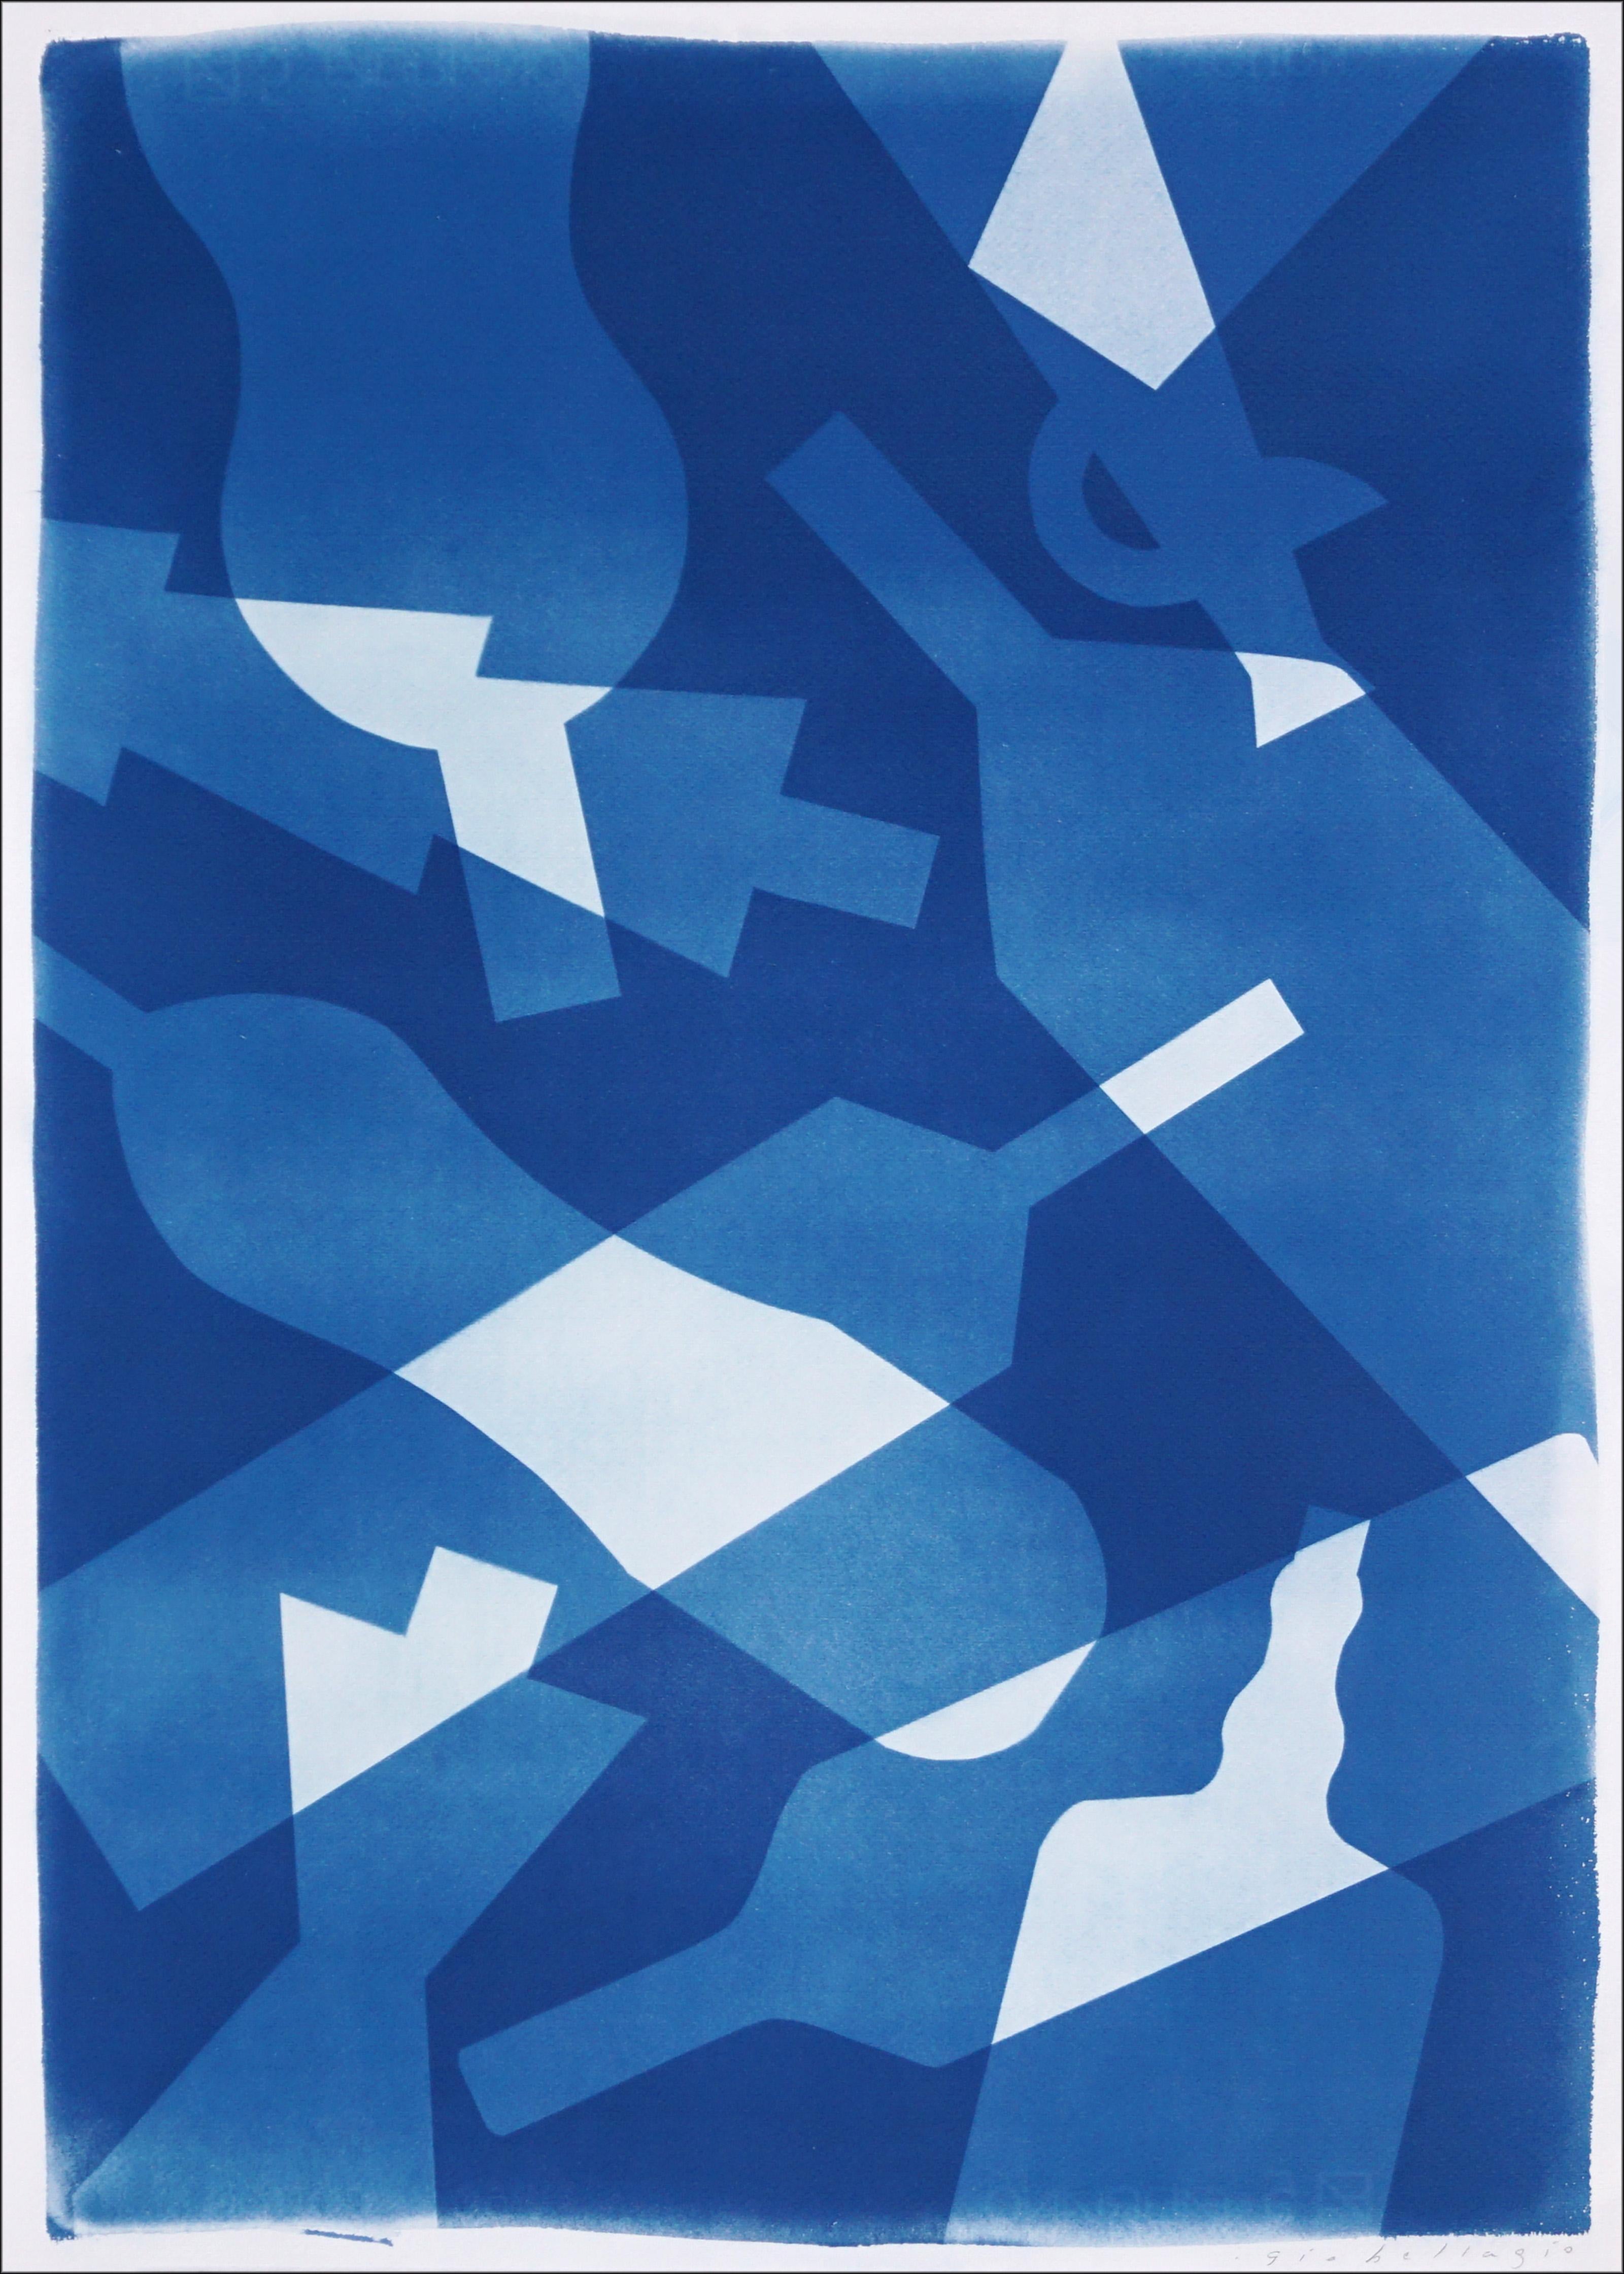 Gio Bellagio Still-Life Painting - Falling Bottles, Still Life in Blue Tones, Patterns and Layers, Unique Cyanotype